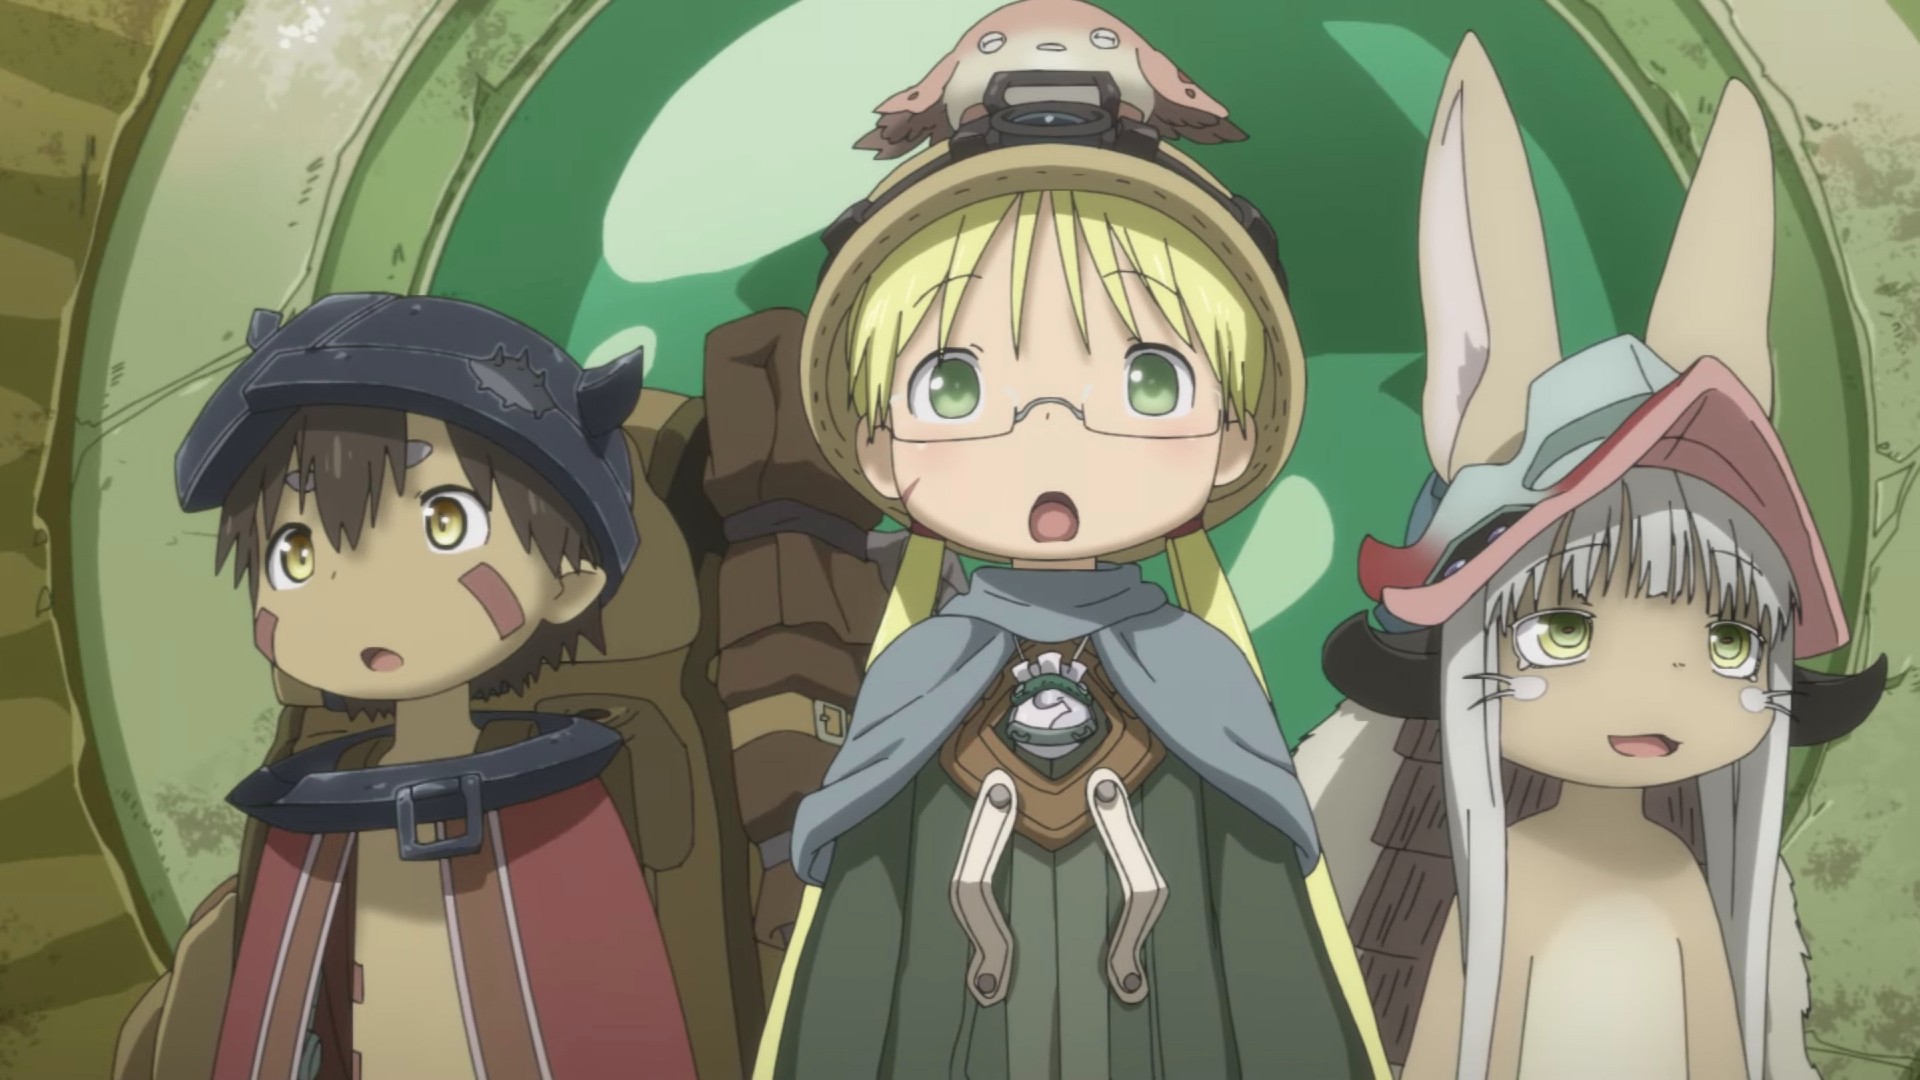 Made in Abyss Season 2: What You Need to Know Before Watching | Den of Geek